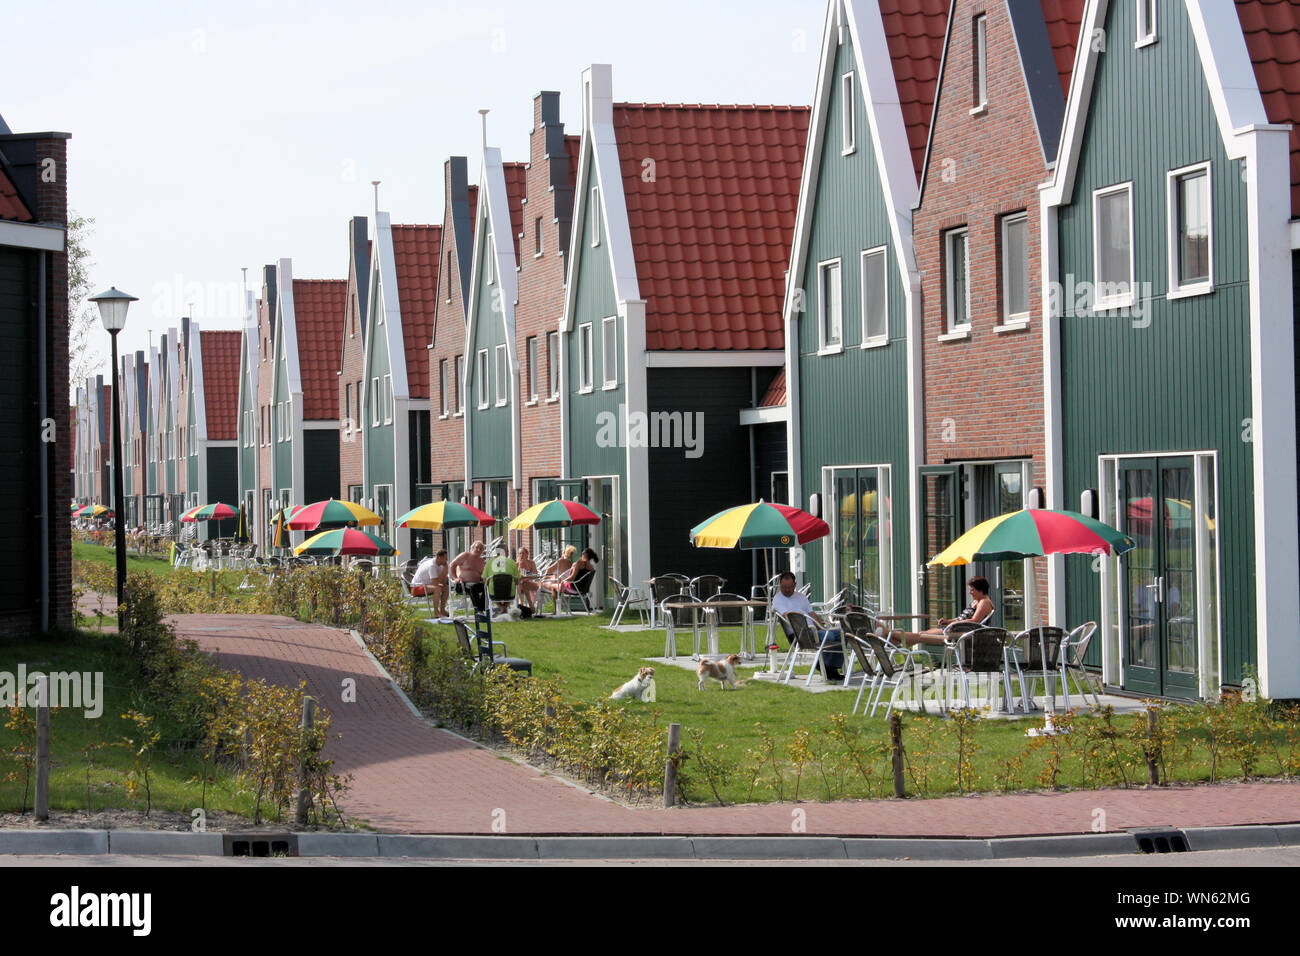 The Volendam residents are enjoying the warm sunny day outside their wooden houses in the summer. Stock Photo